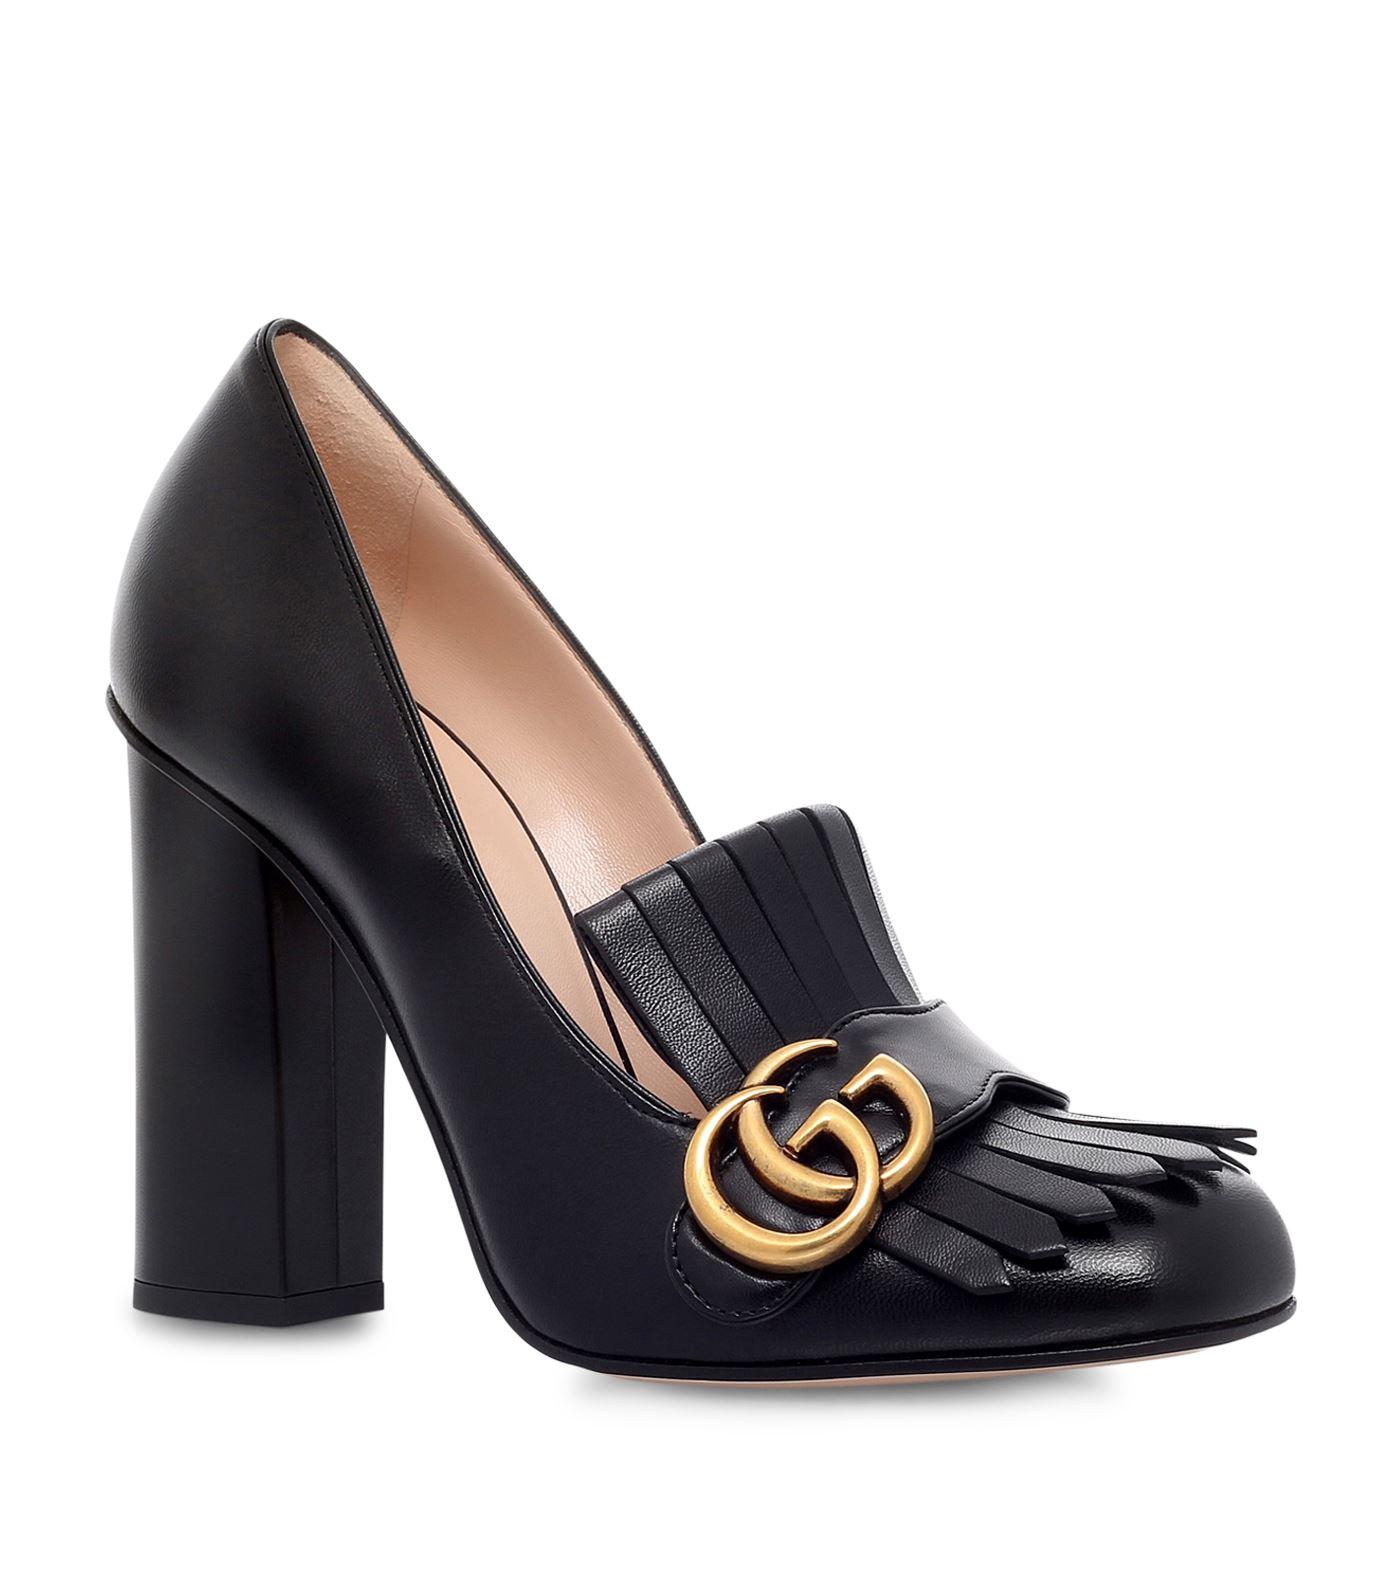 Gucci Marmont Fringed Loafer Heels 105 in Black | Lyst